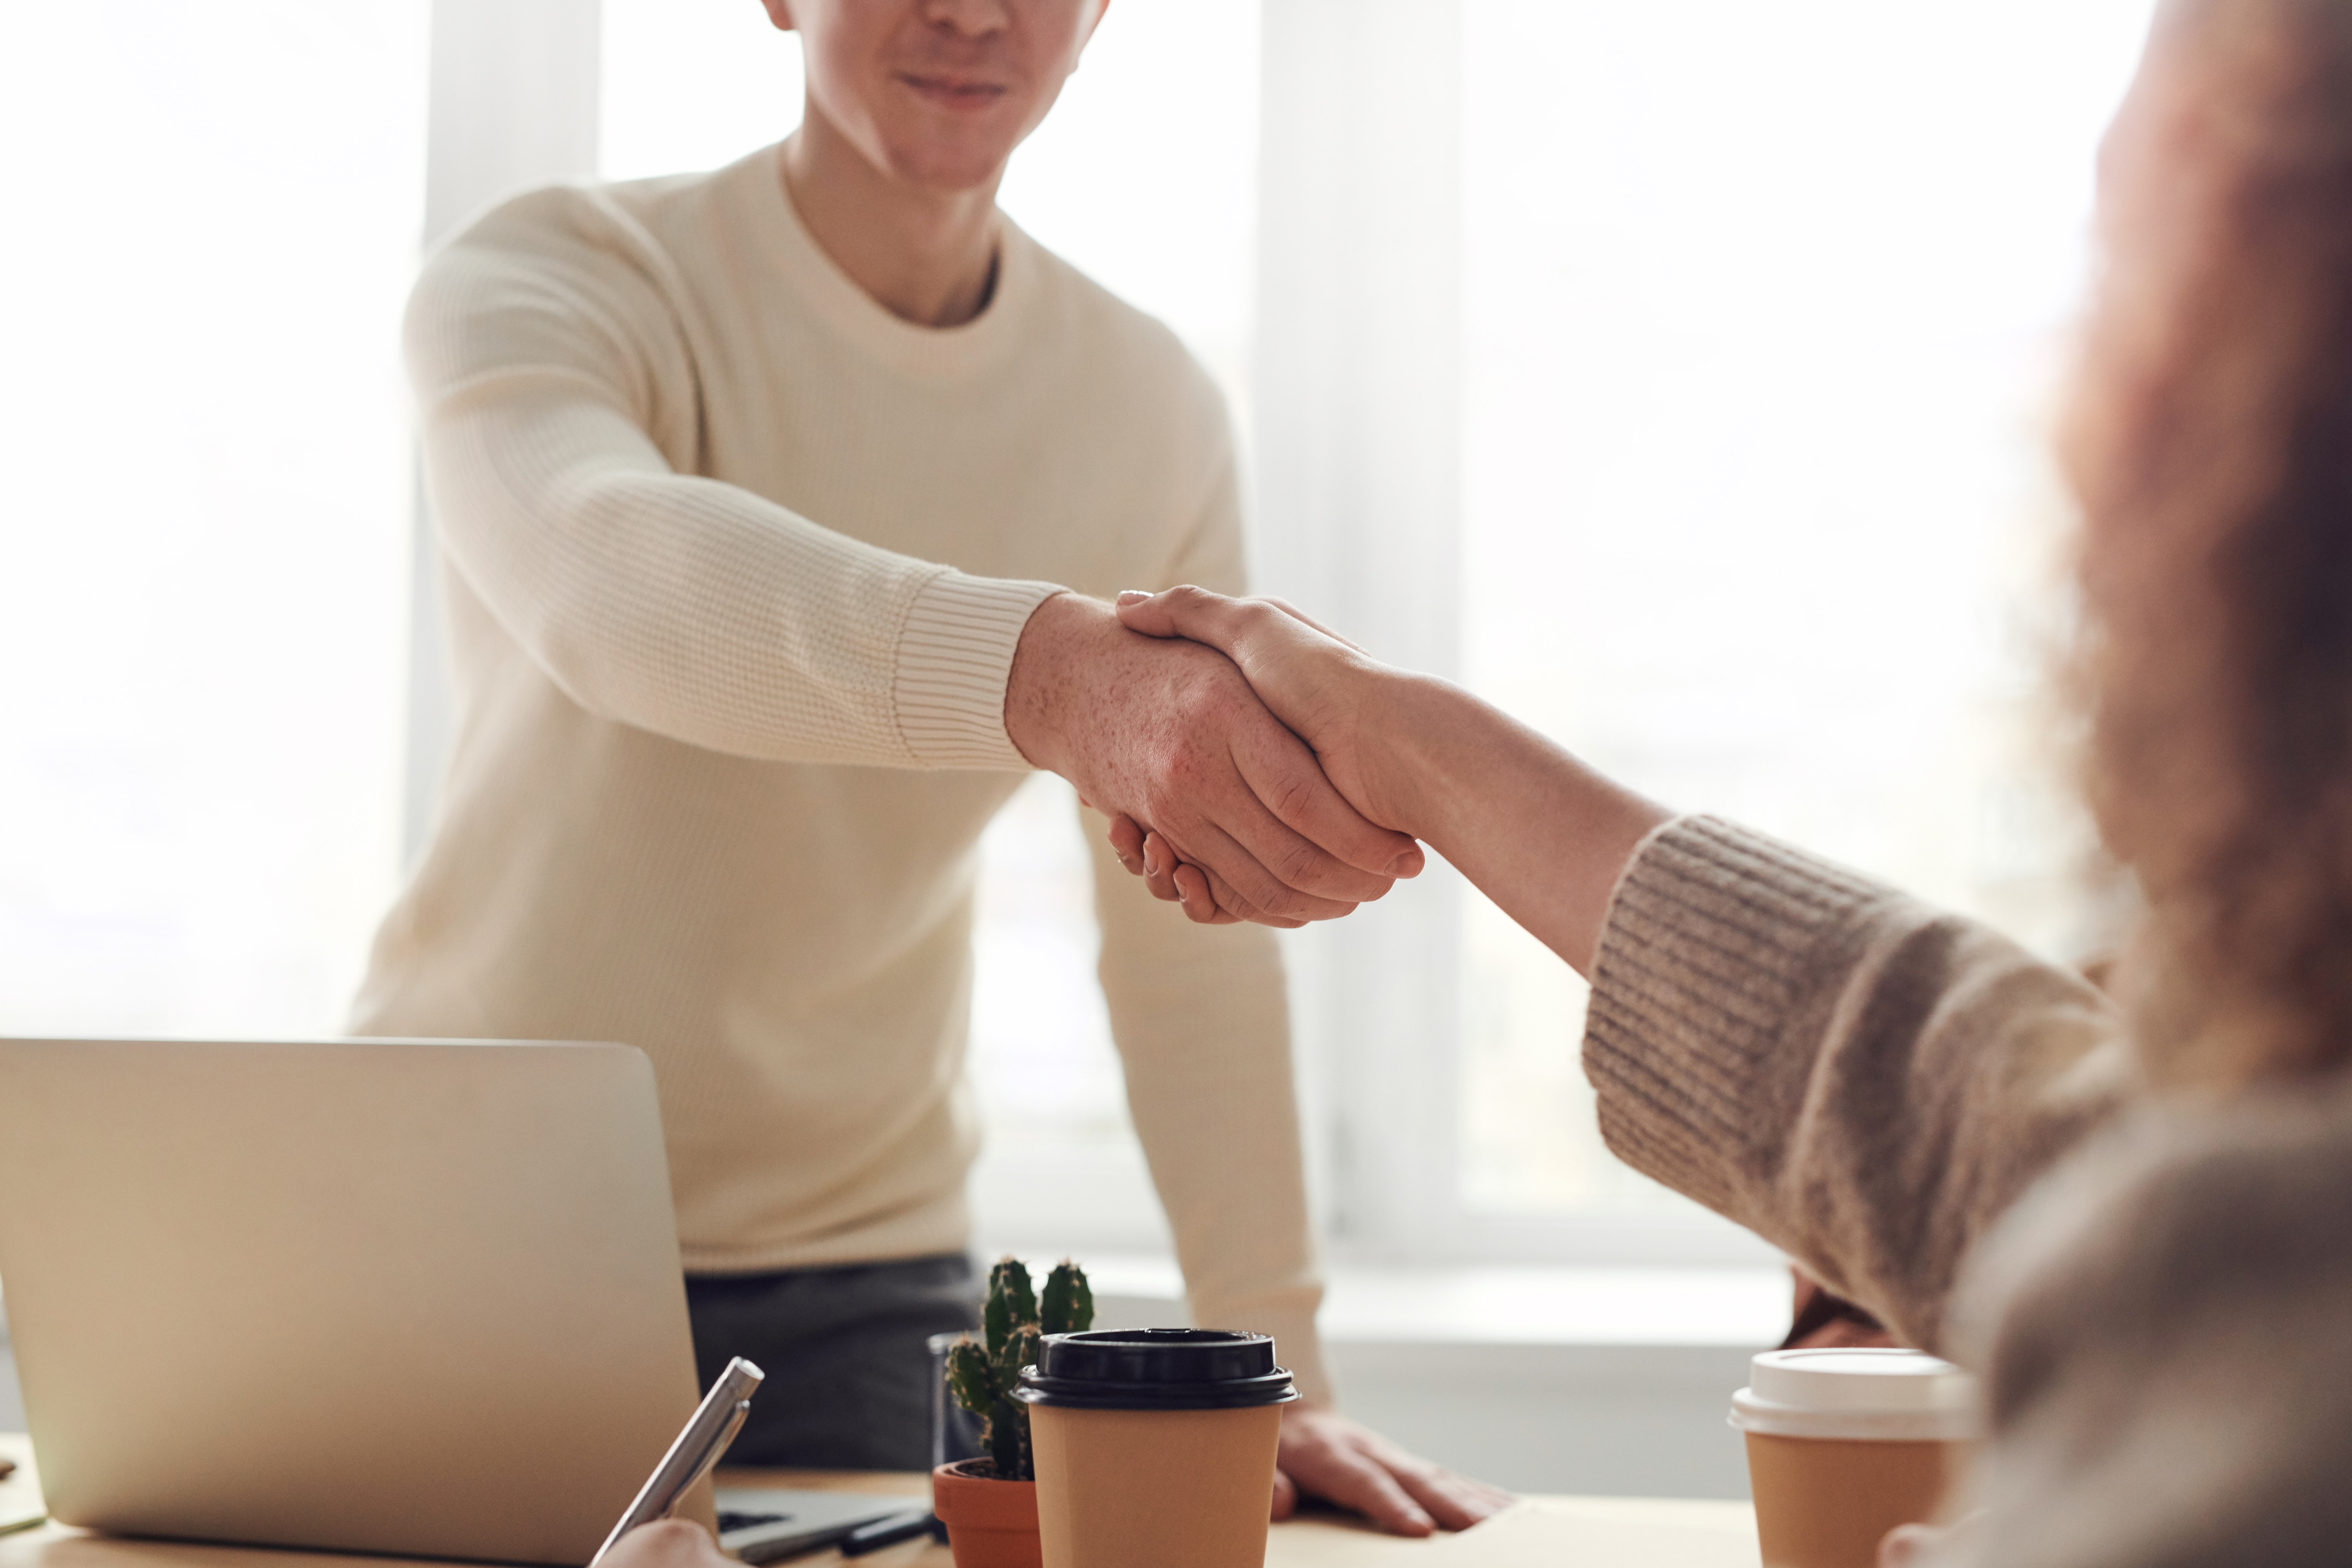 Insurance agent shaking hands with a client